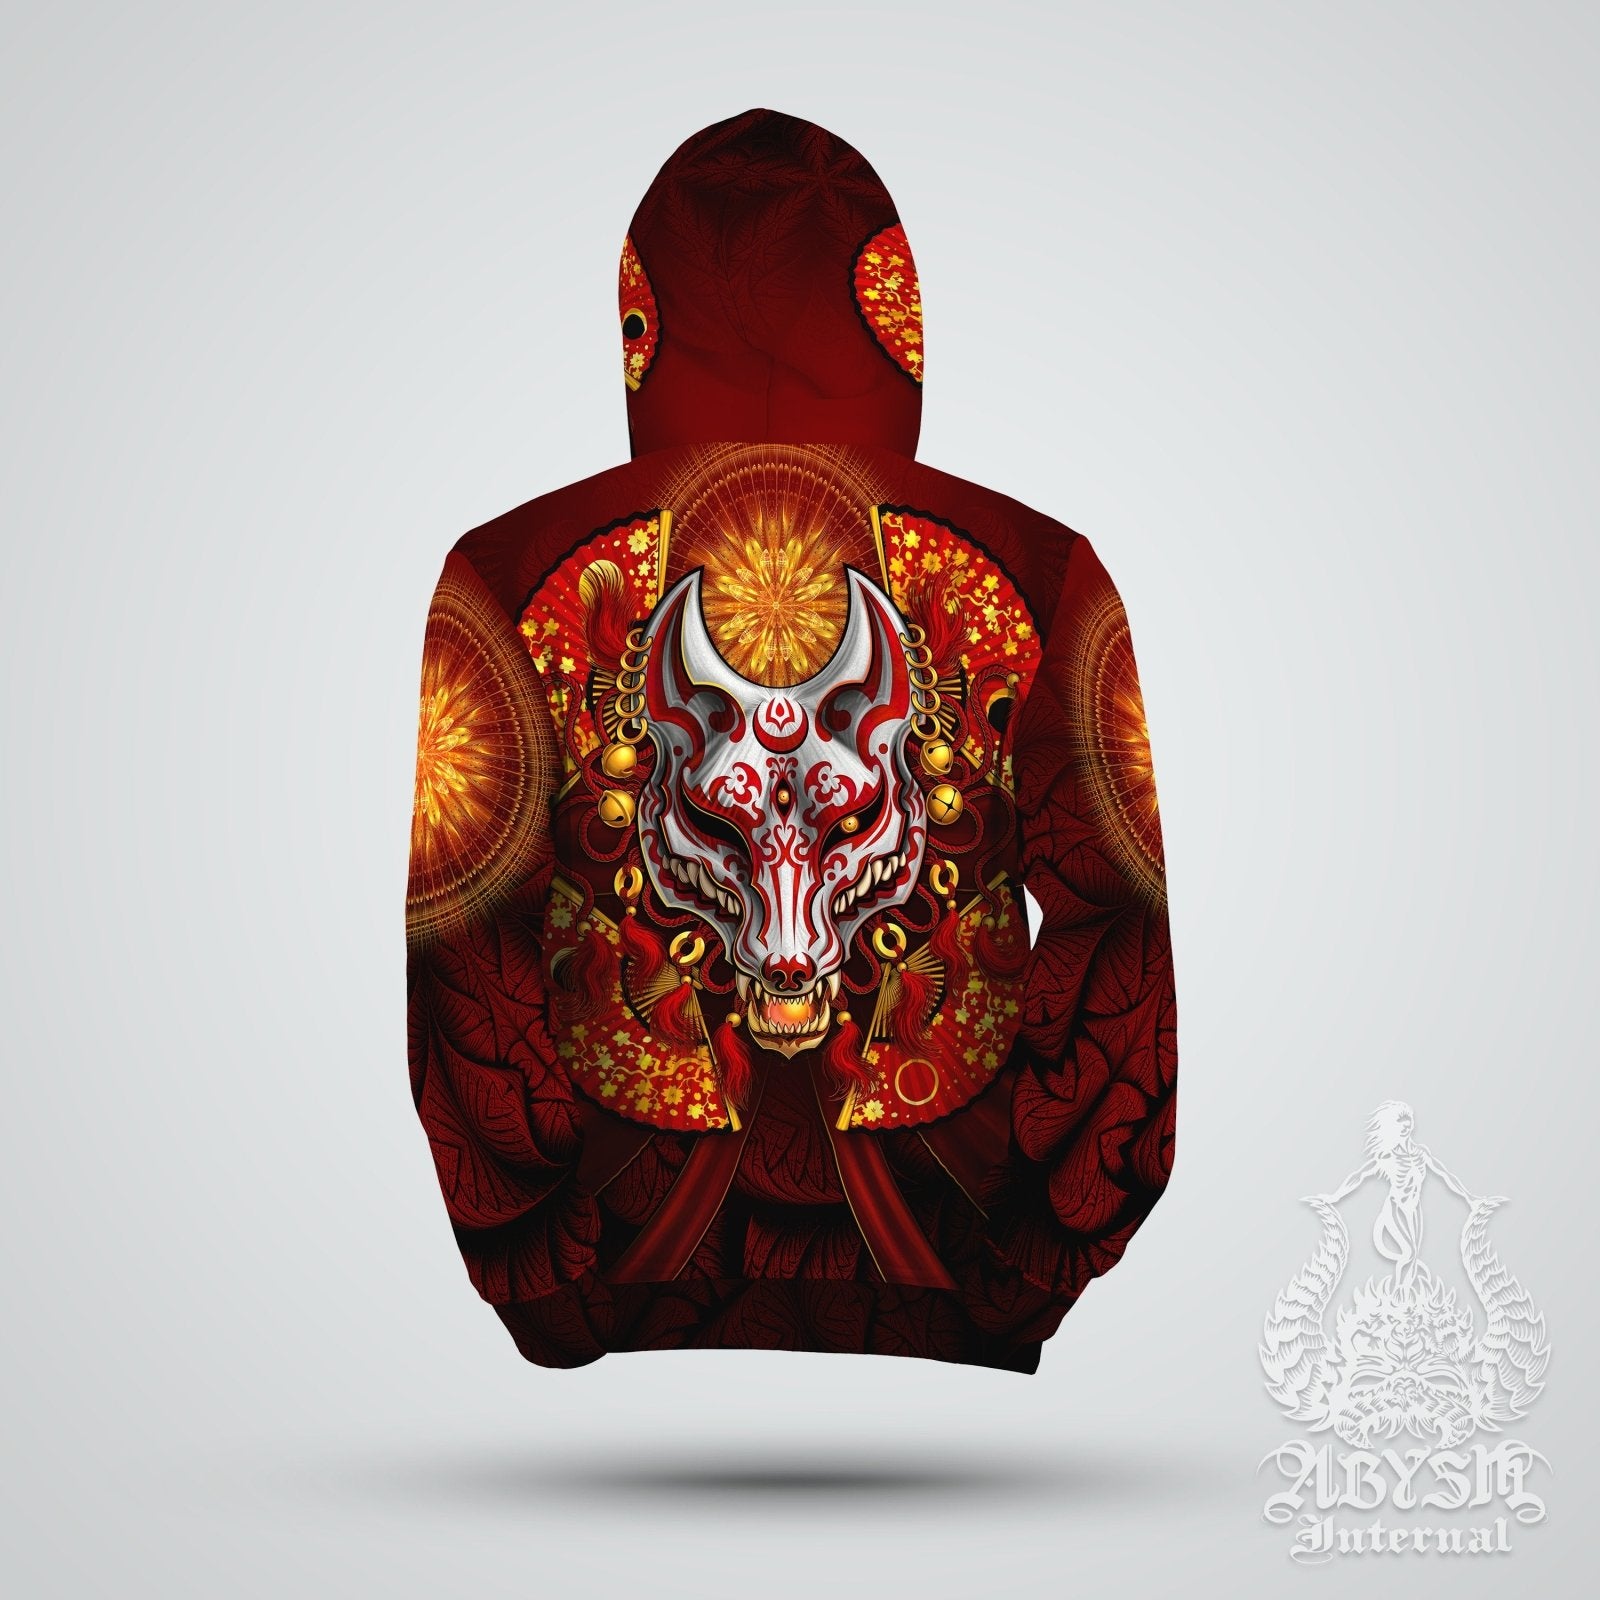 Anime Hoodie, Street Outfit, Japanese Streetwear, Gamer Apparel, Alternative Clothing, Unisex - Fox or Kitsune Mask, Red and White - Abysm Internal